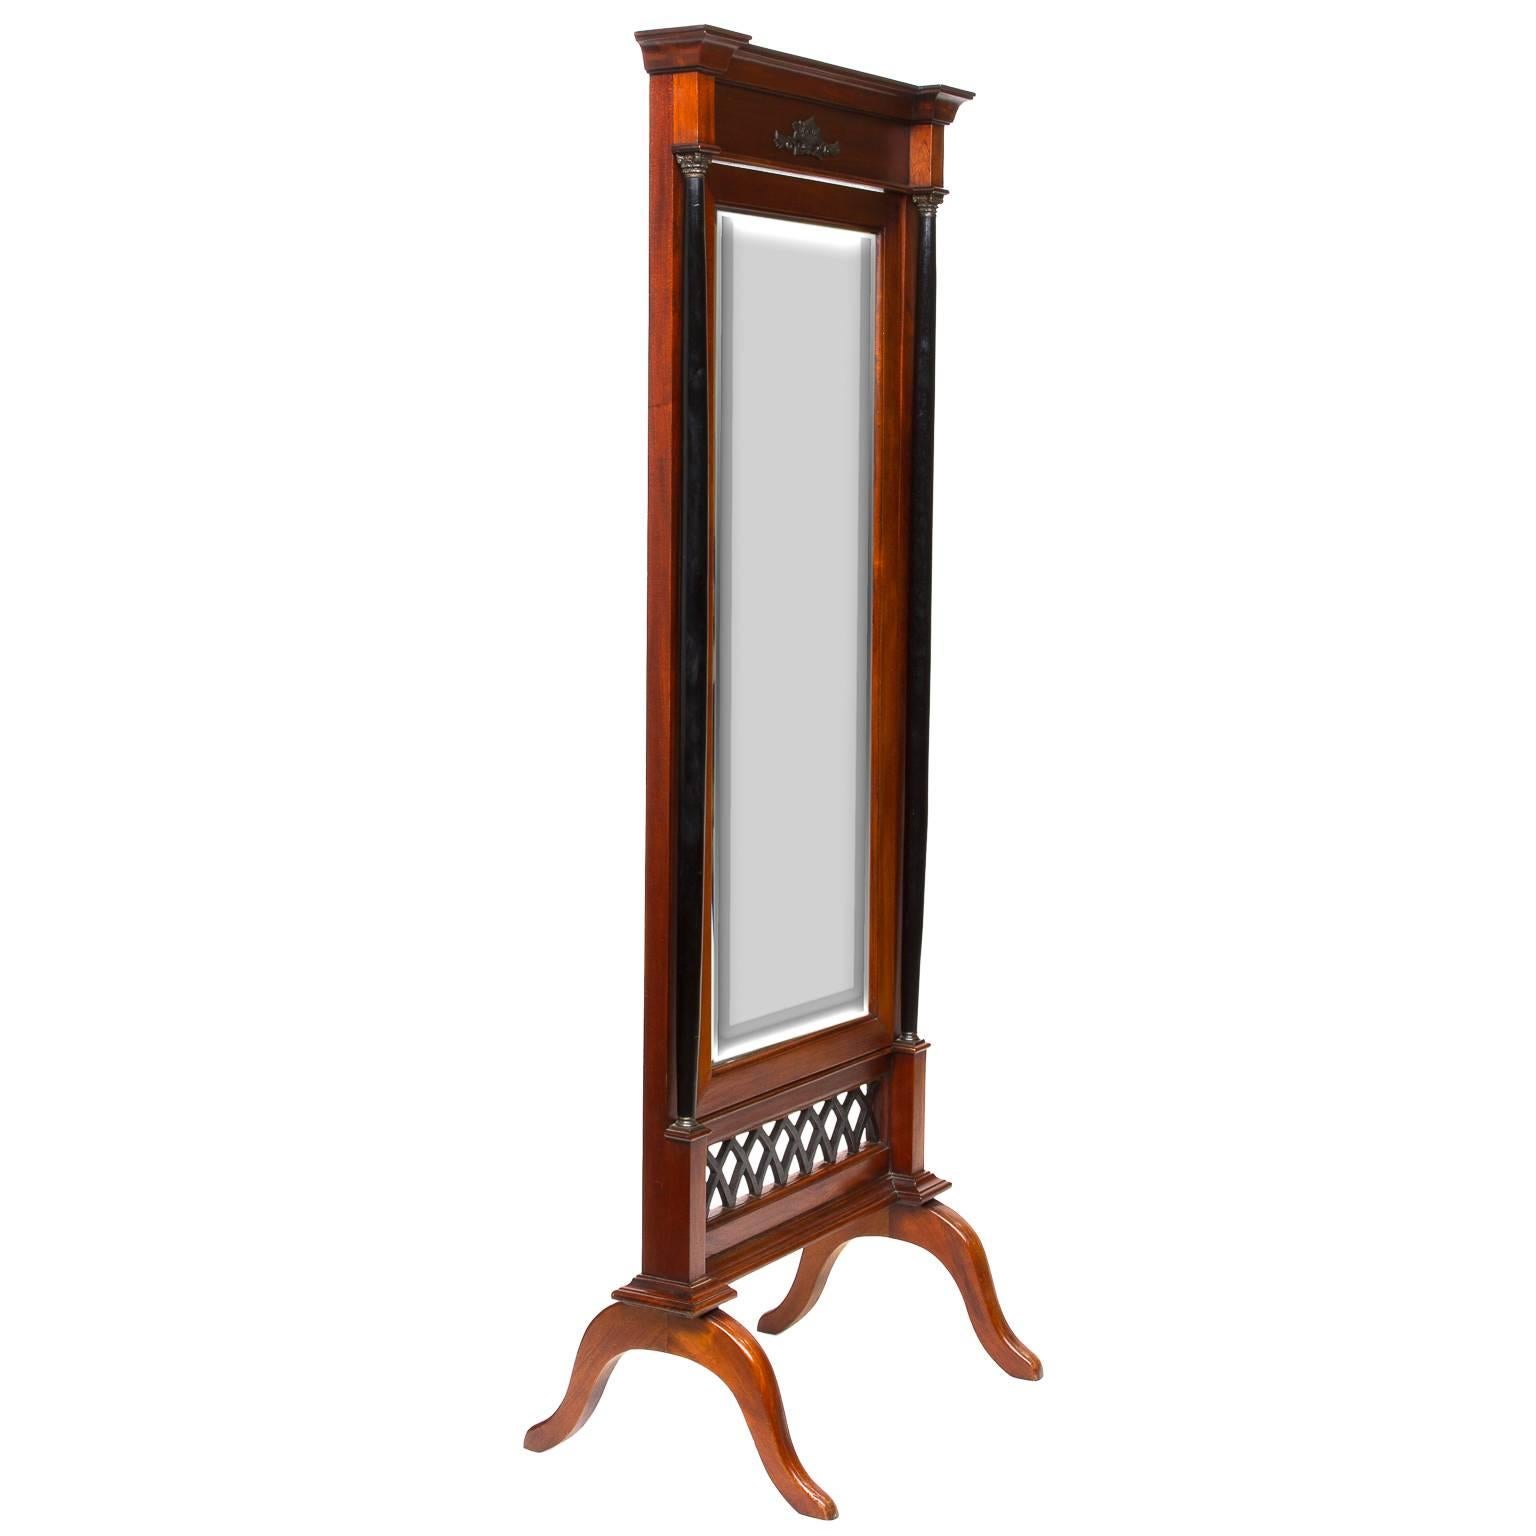 Purchased in England, is this vintage Biedermeier cheval mirror. Beveled mirror surrounded in a mahogany frame then mounted to a very supportive structure. The real look are the ebonized pair of columns to each side and the pierce design below the